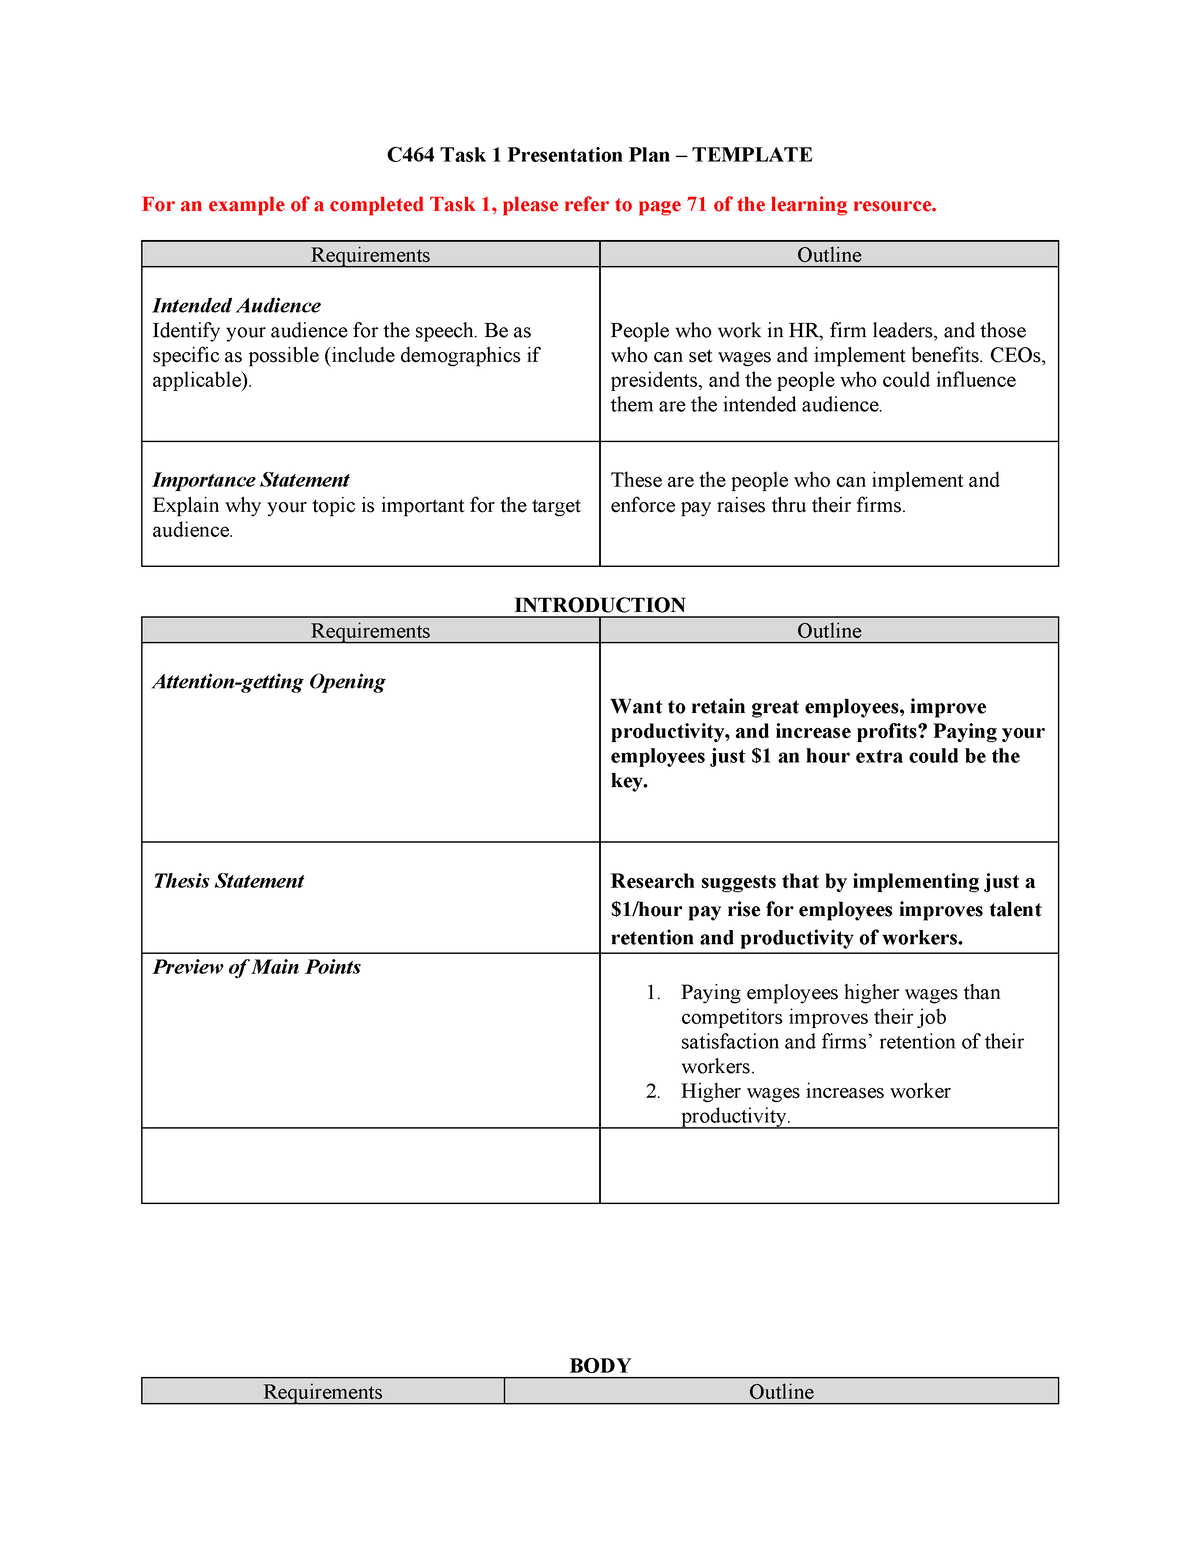 C464 Task 1 - Passed - C464 Task 1 Presentation Plan – TEMPLATE For an ...